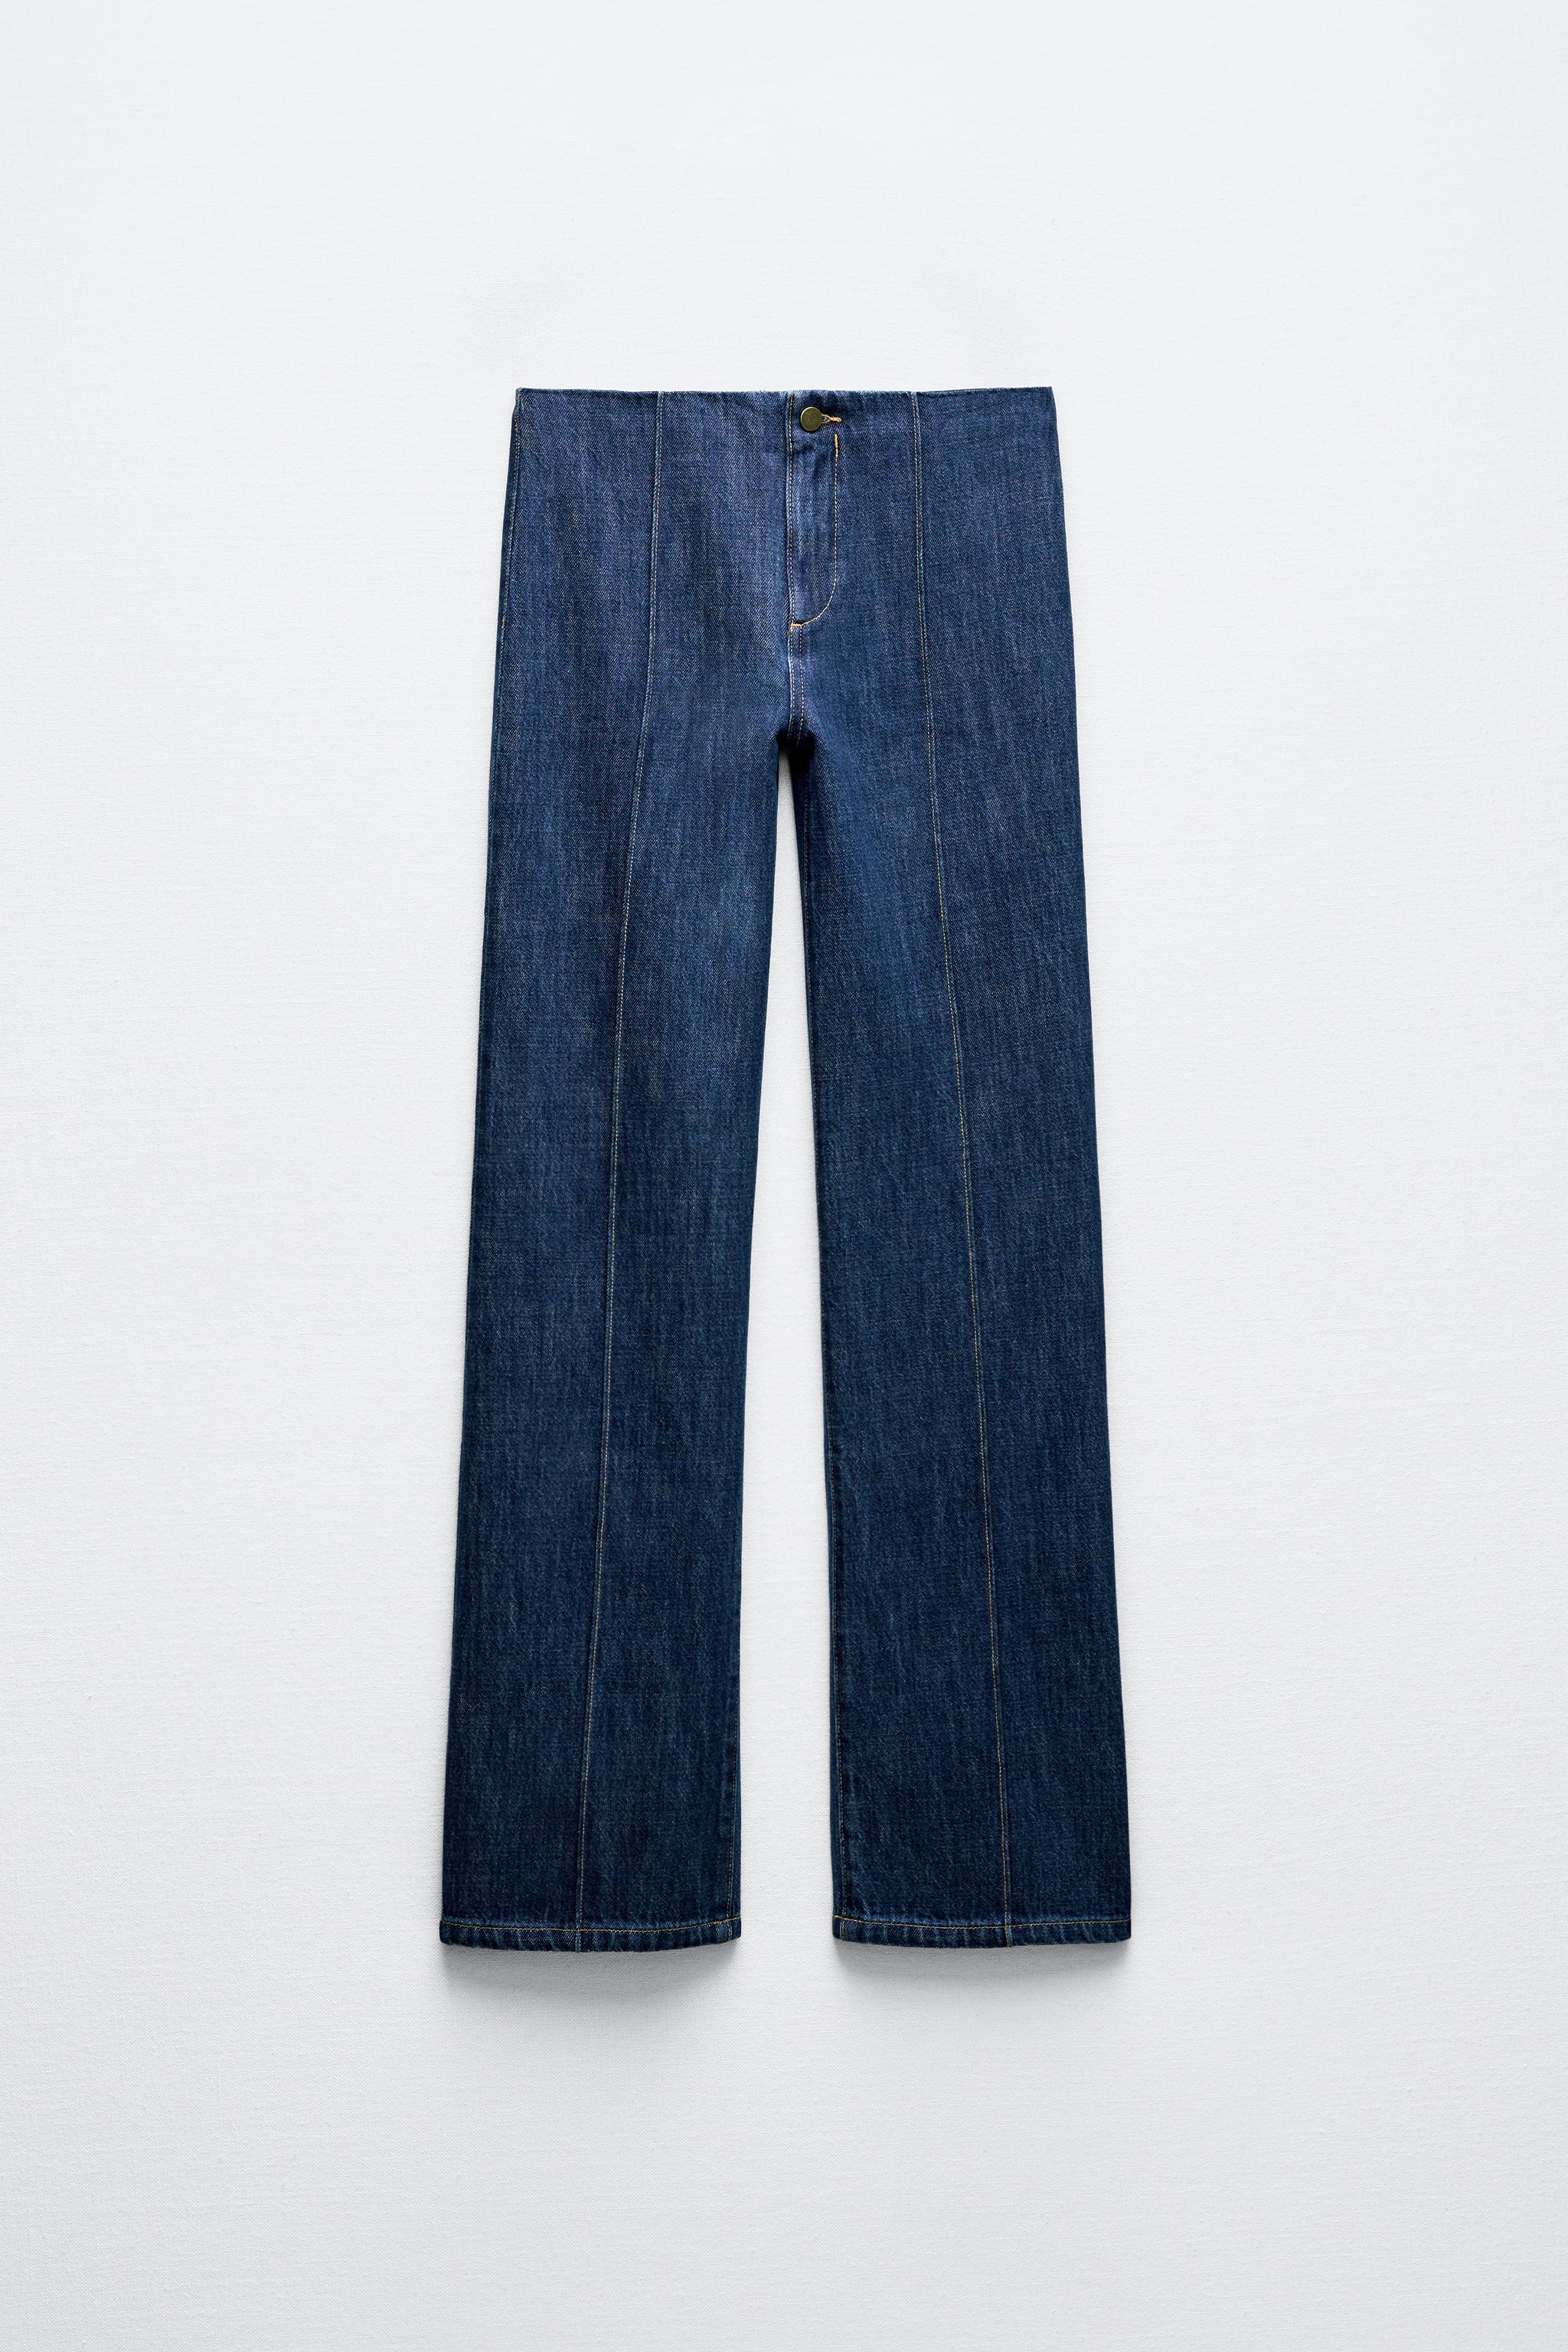 Z1975 MID RISE LONG LENGTH STRAIGHT CUT JEANS